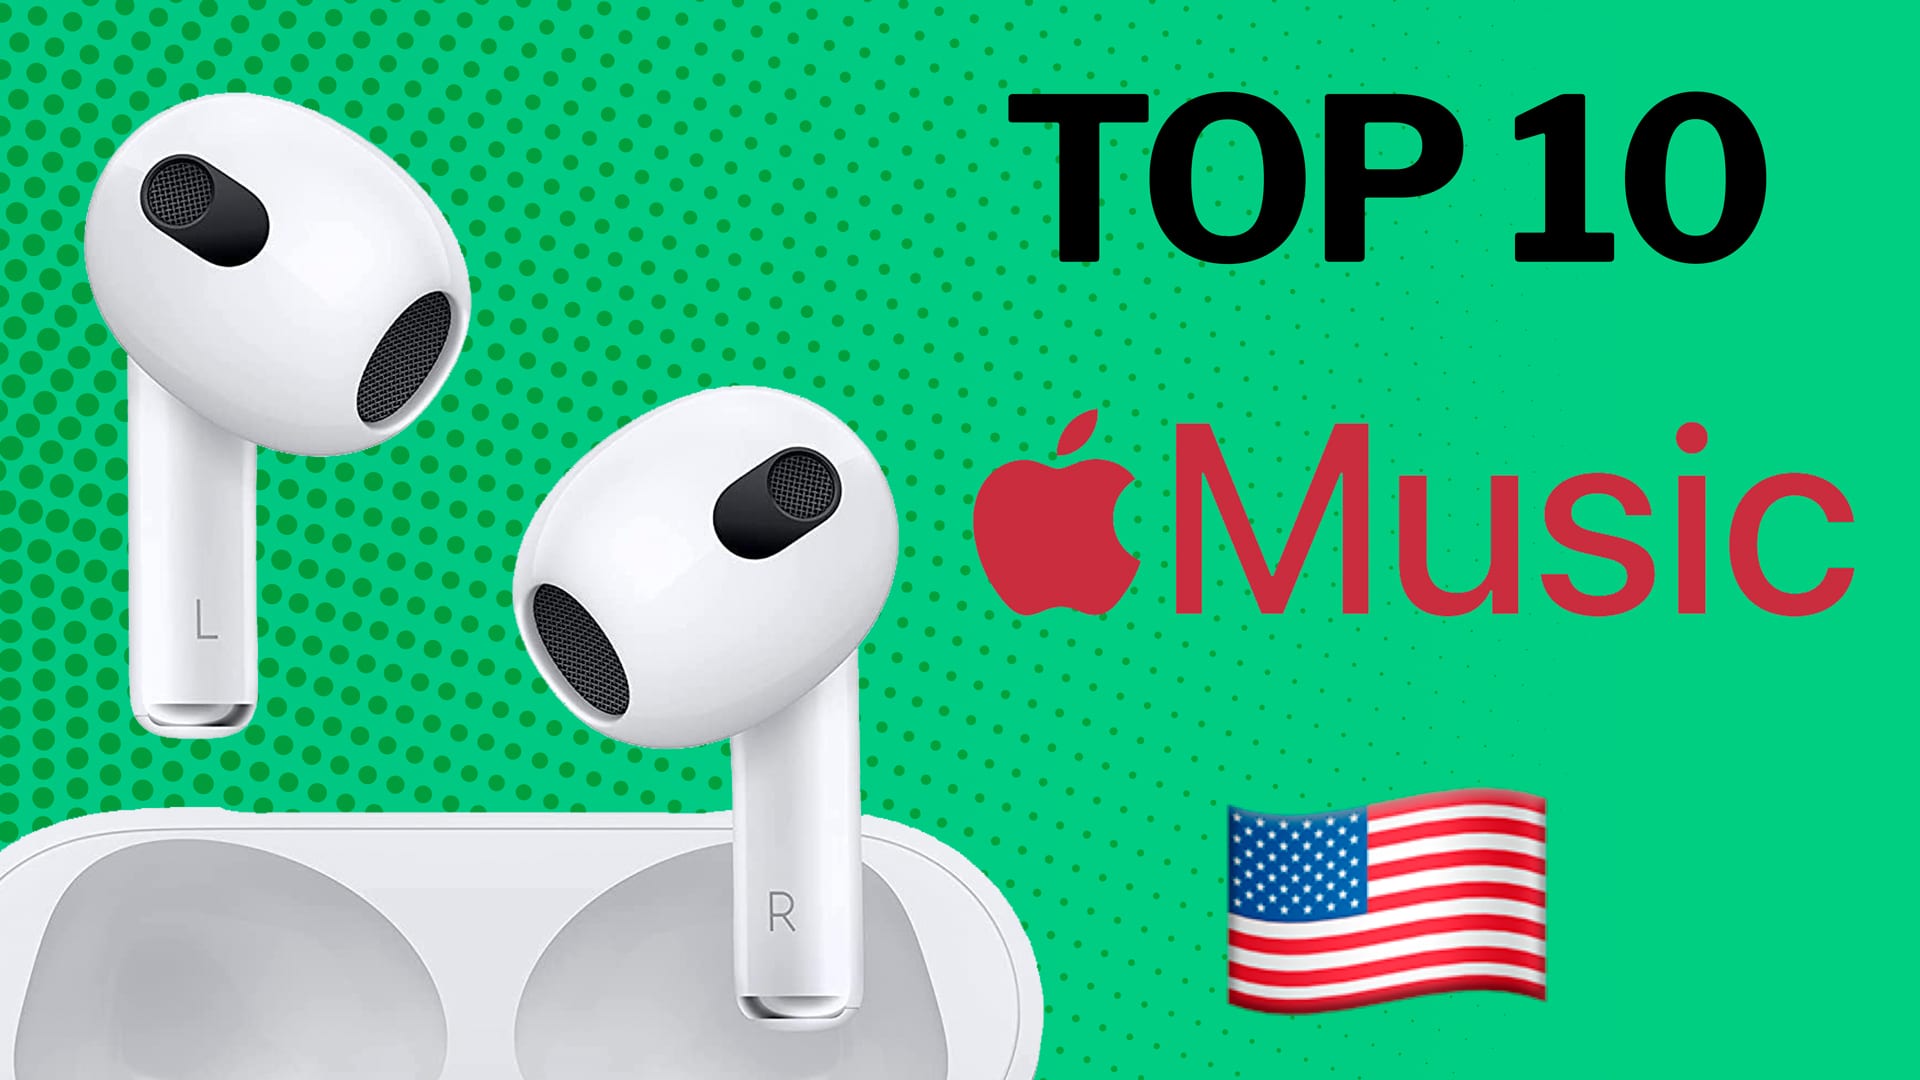 Apple ranking: the 10 most listened songs in the United States